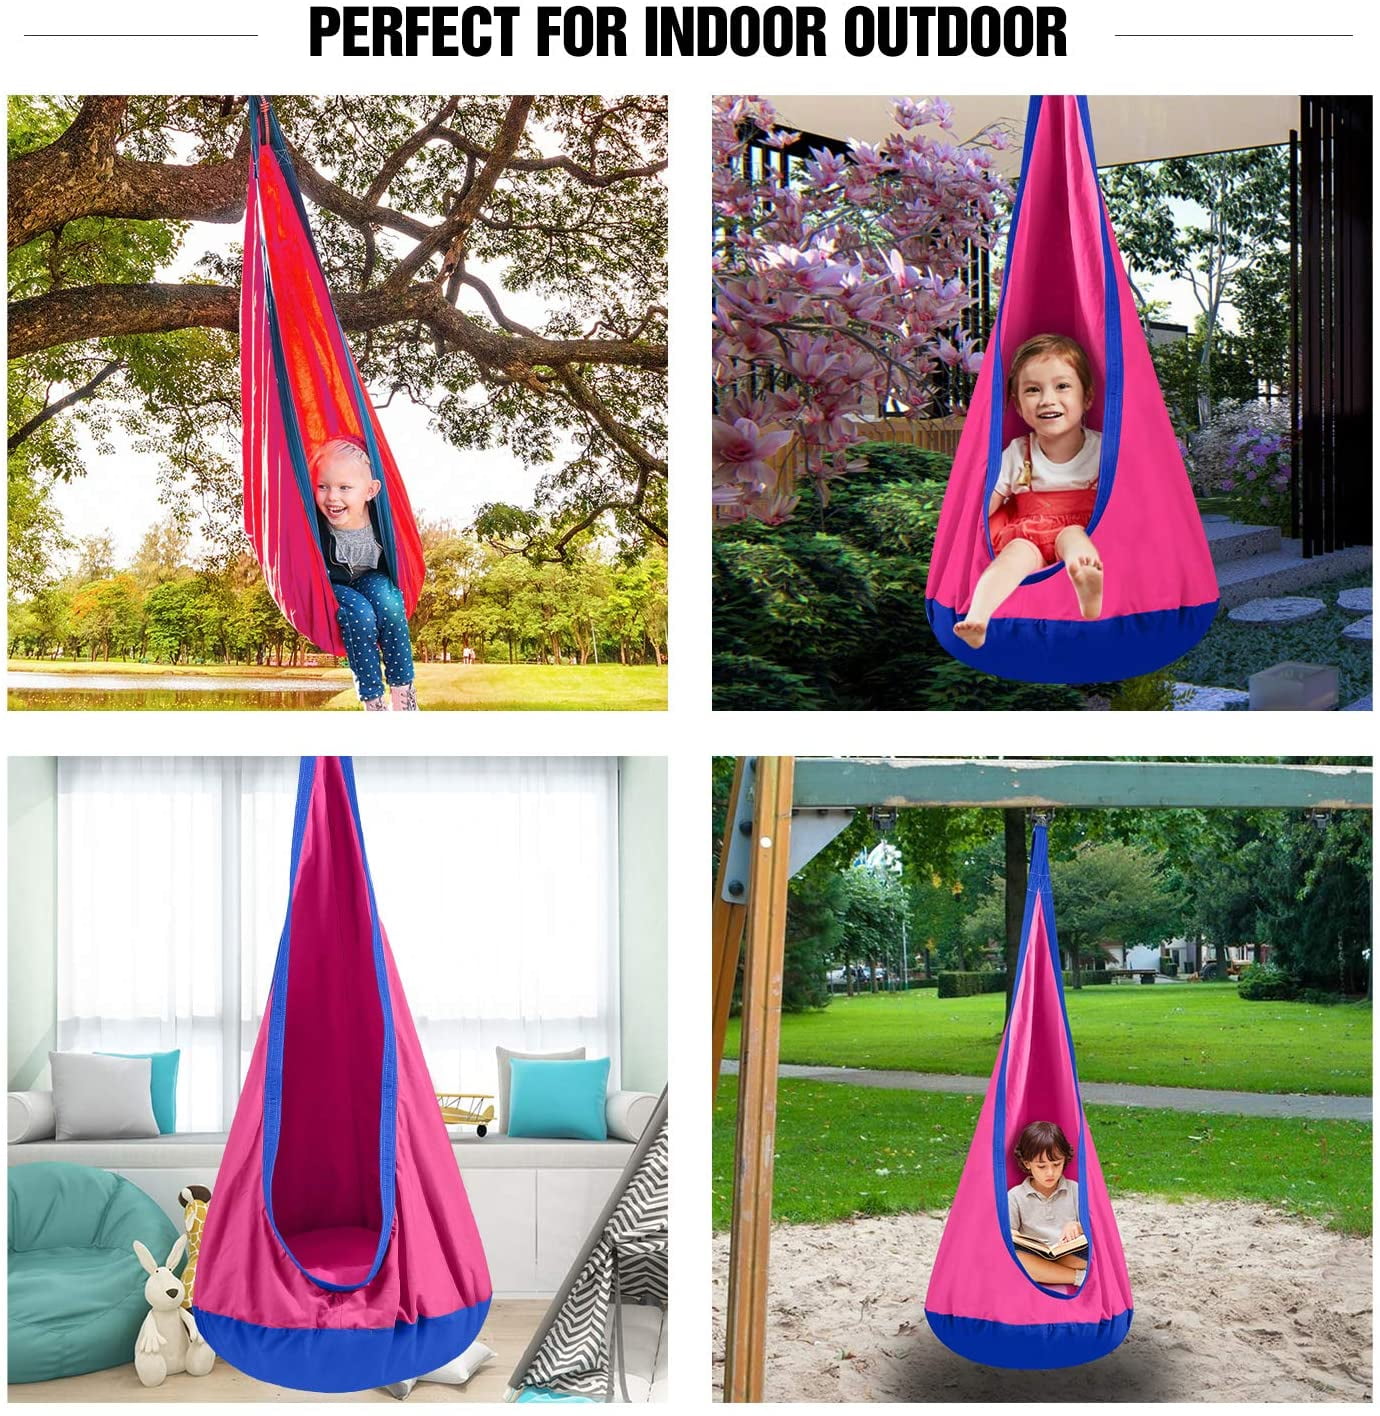 Move This Stand-Alone Swing To Any Room Relax Children’s Swoon Pod Swing Pink Indoor Hanging Air Chair Seats Kids Comfortably Read The Perfect Reading Nook & Hangout Zone Or Play 